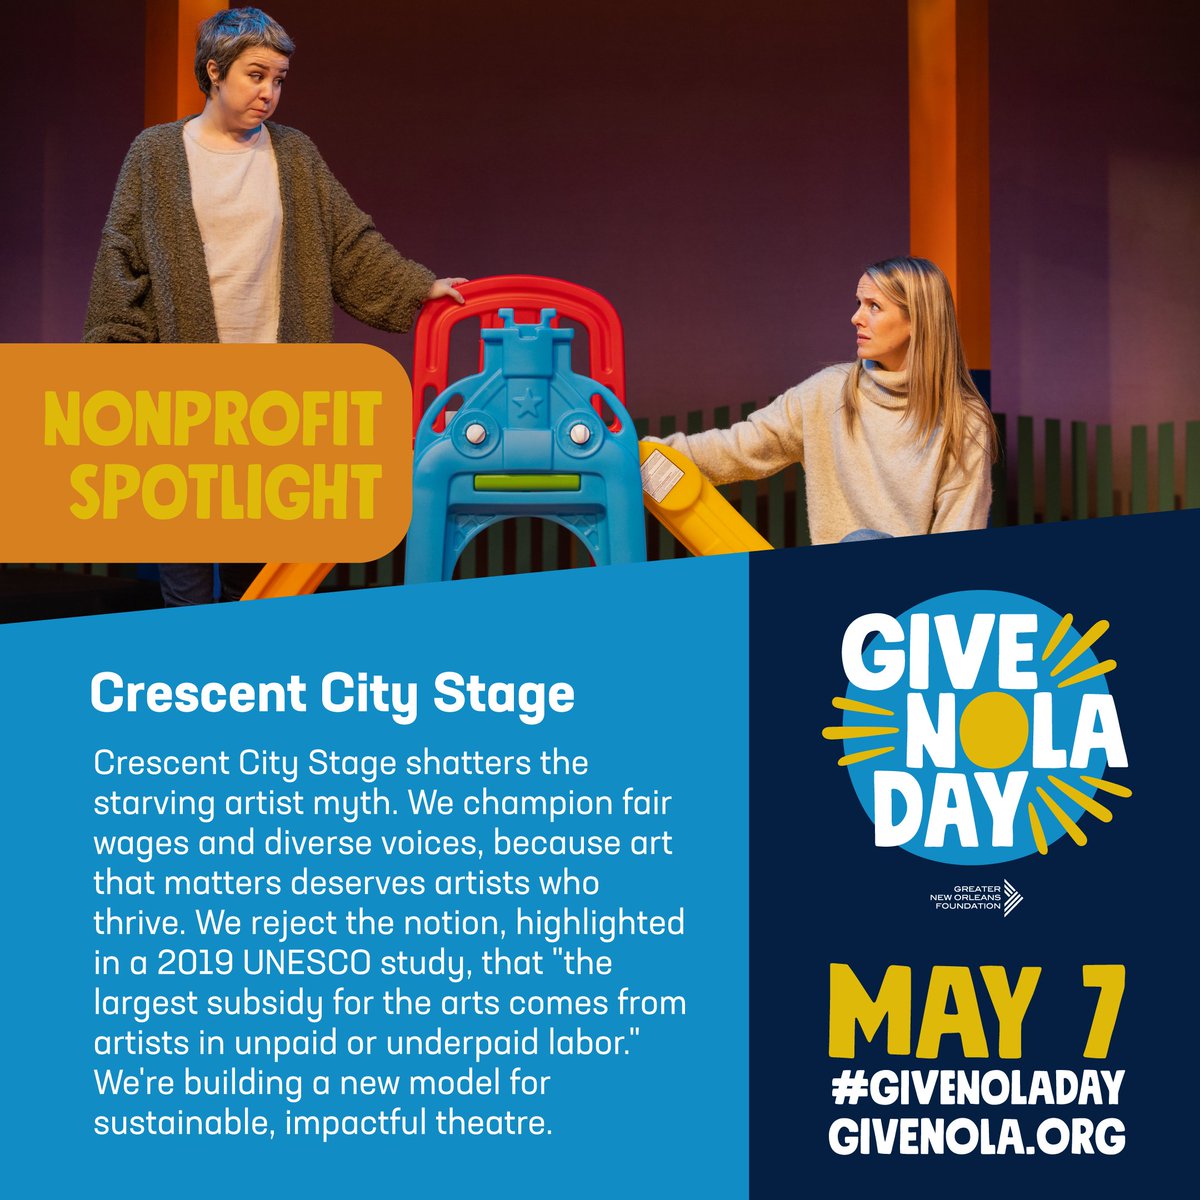 Next up, we’re spotlighting #GiveNOLADay nonprofit, @CrescentStage, which champions fair wages and diverse voices, because art that matters deserves artists who thrive. Early Giving has begun! Visit givenola.org to donate. #GiveNOLADay is on May 7.